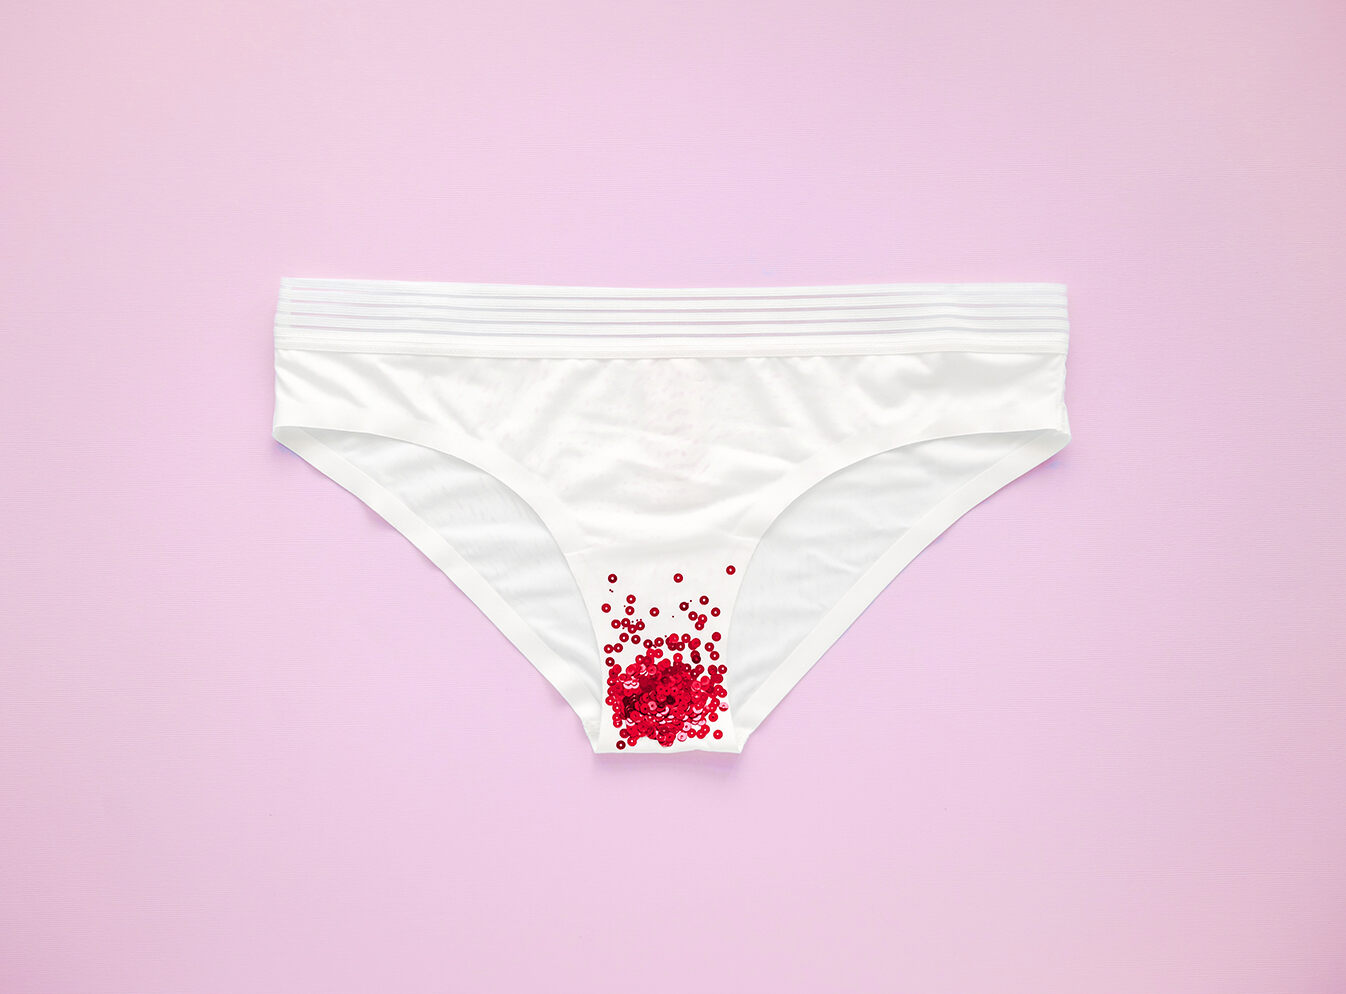 A pair of white panties with red sequins at the bottom in front of a pink background